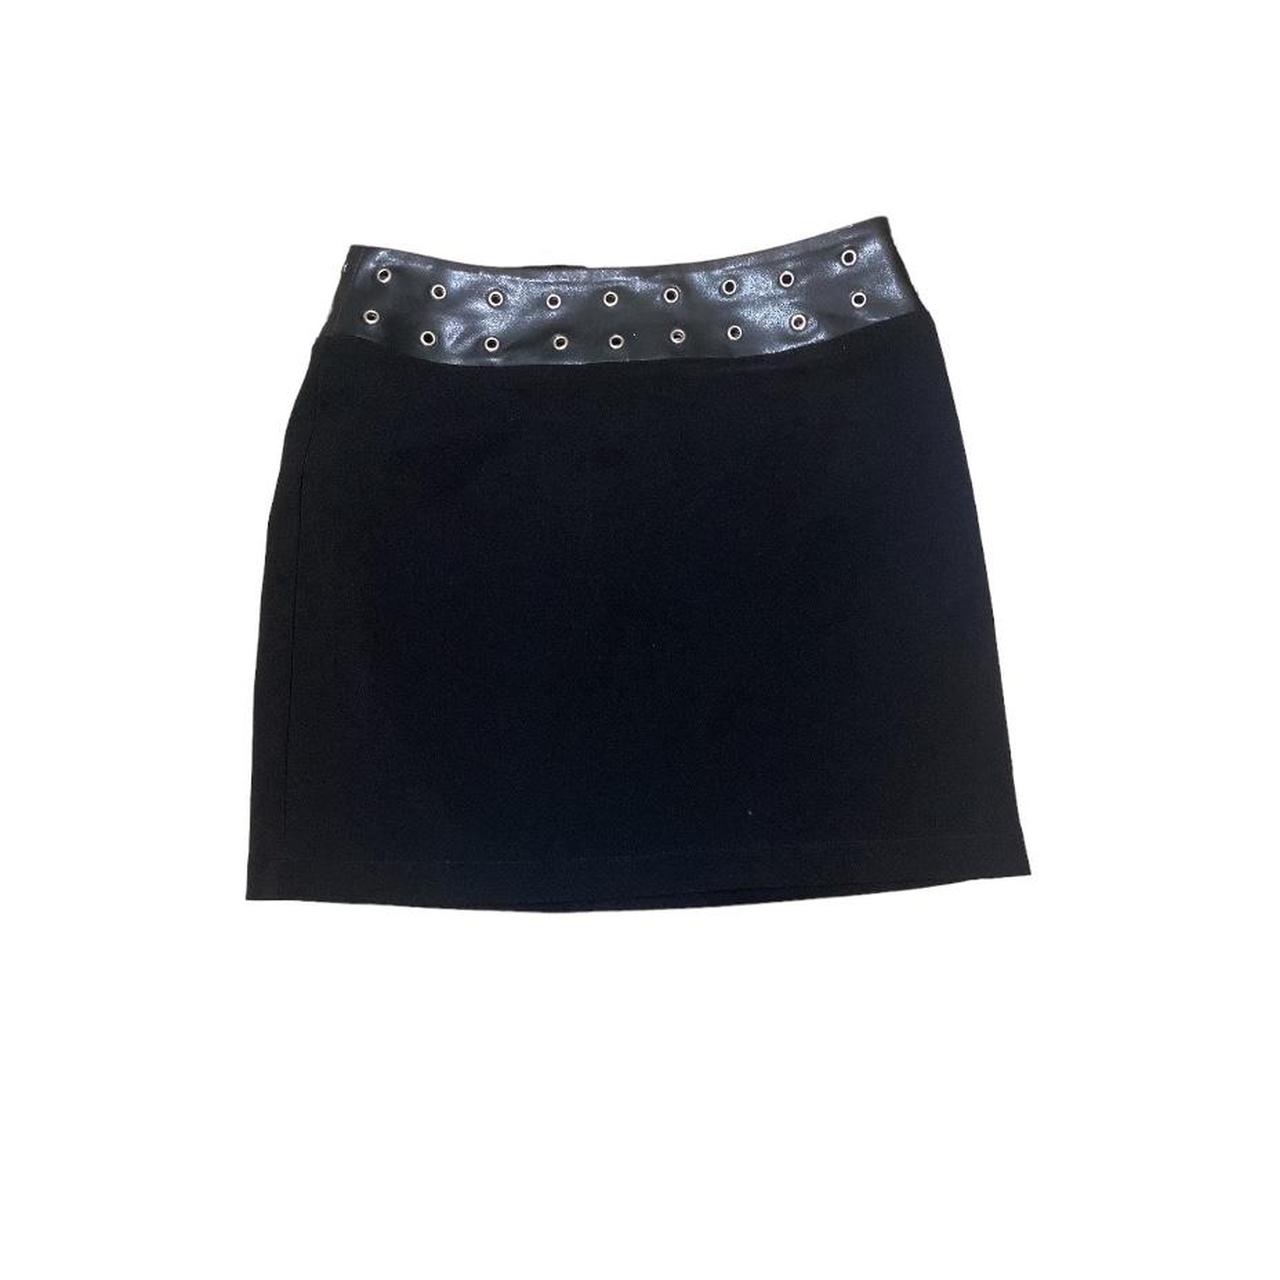 New Look Women's Black and Silver Skirt | Depop